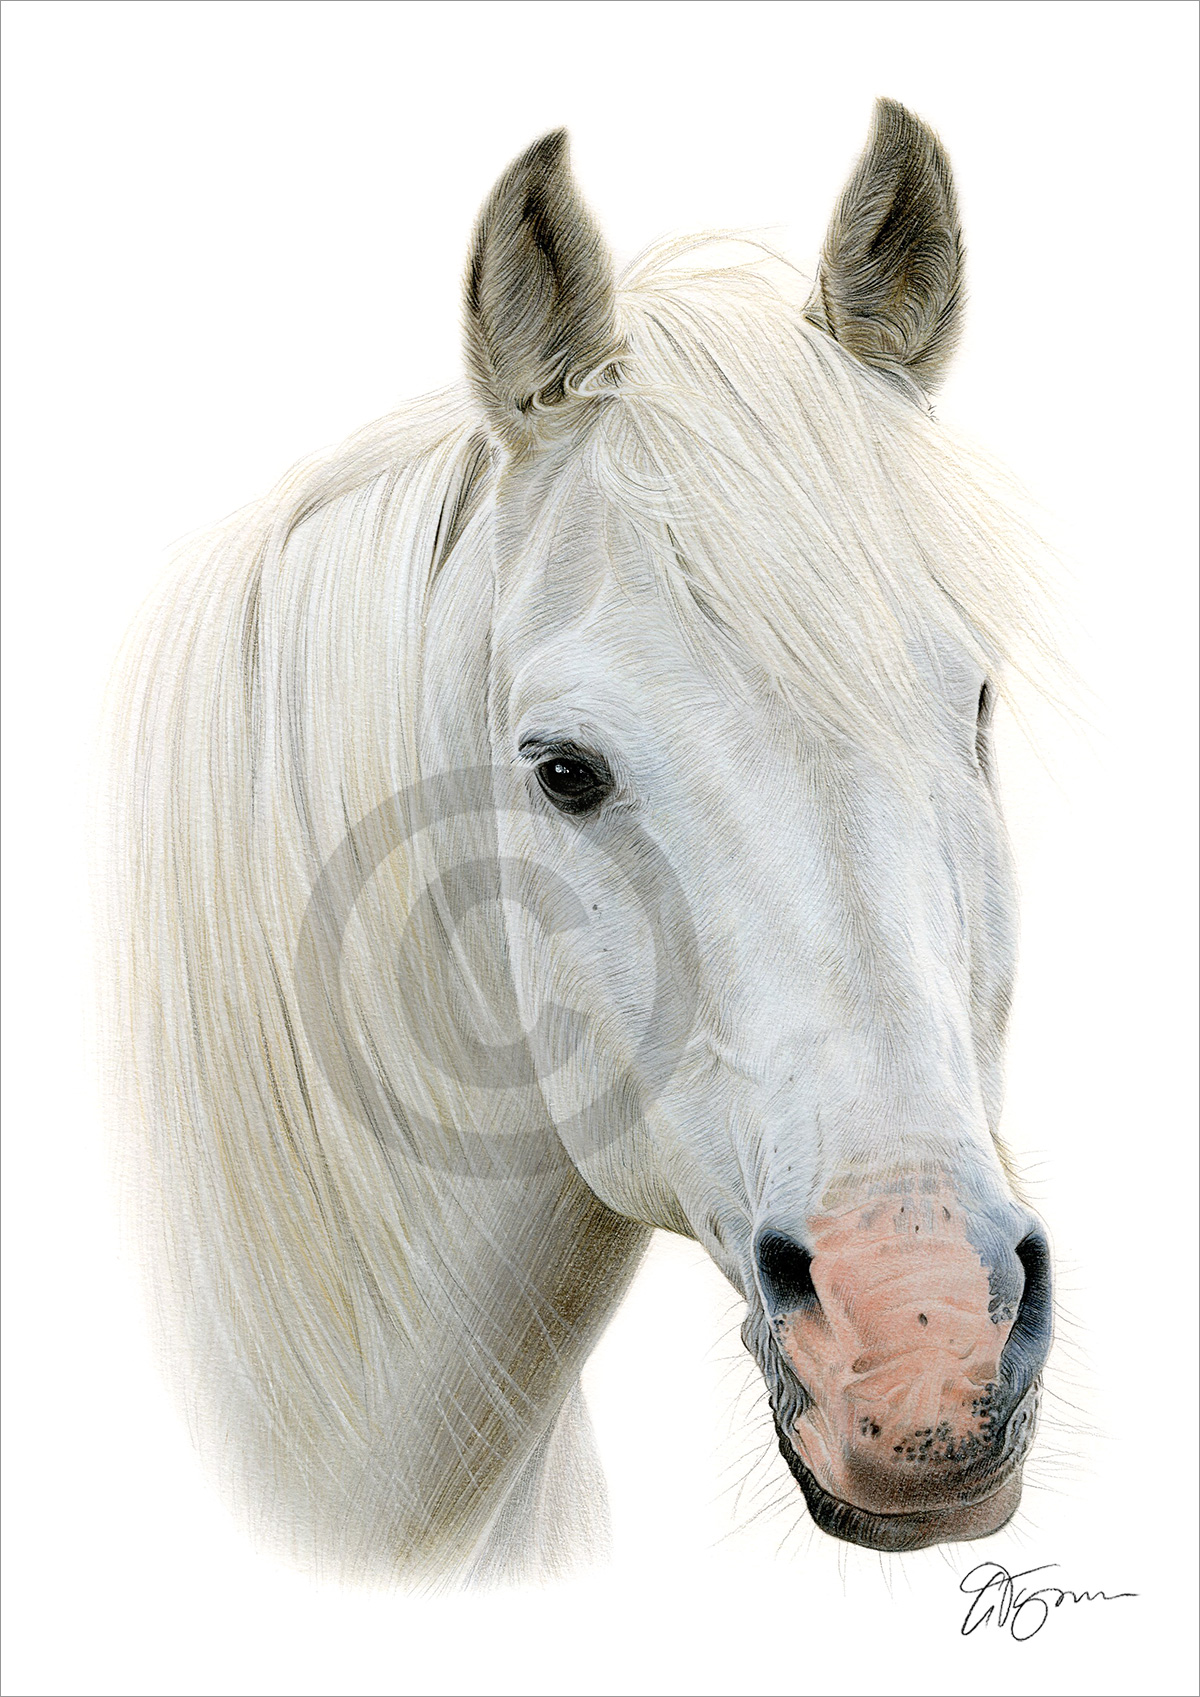 Colour pencil drawing of a white horse by artist Gary Tymon